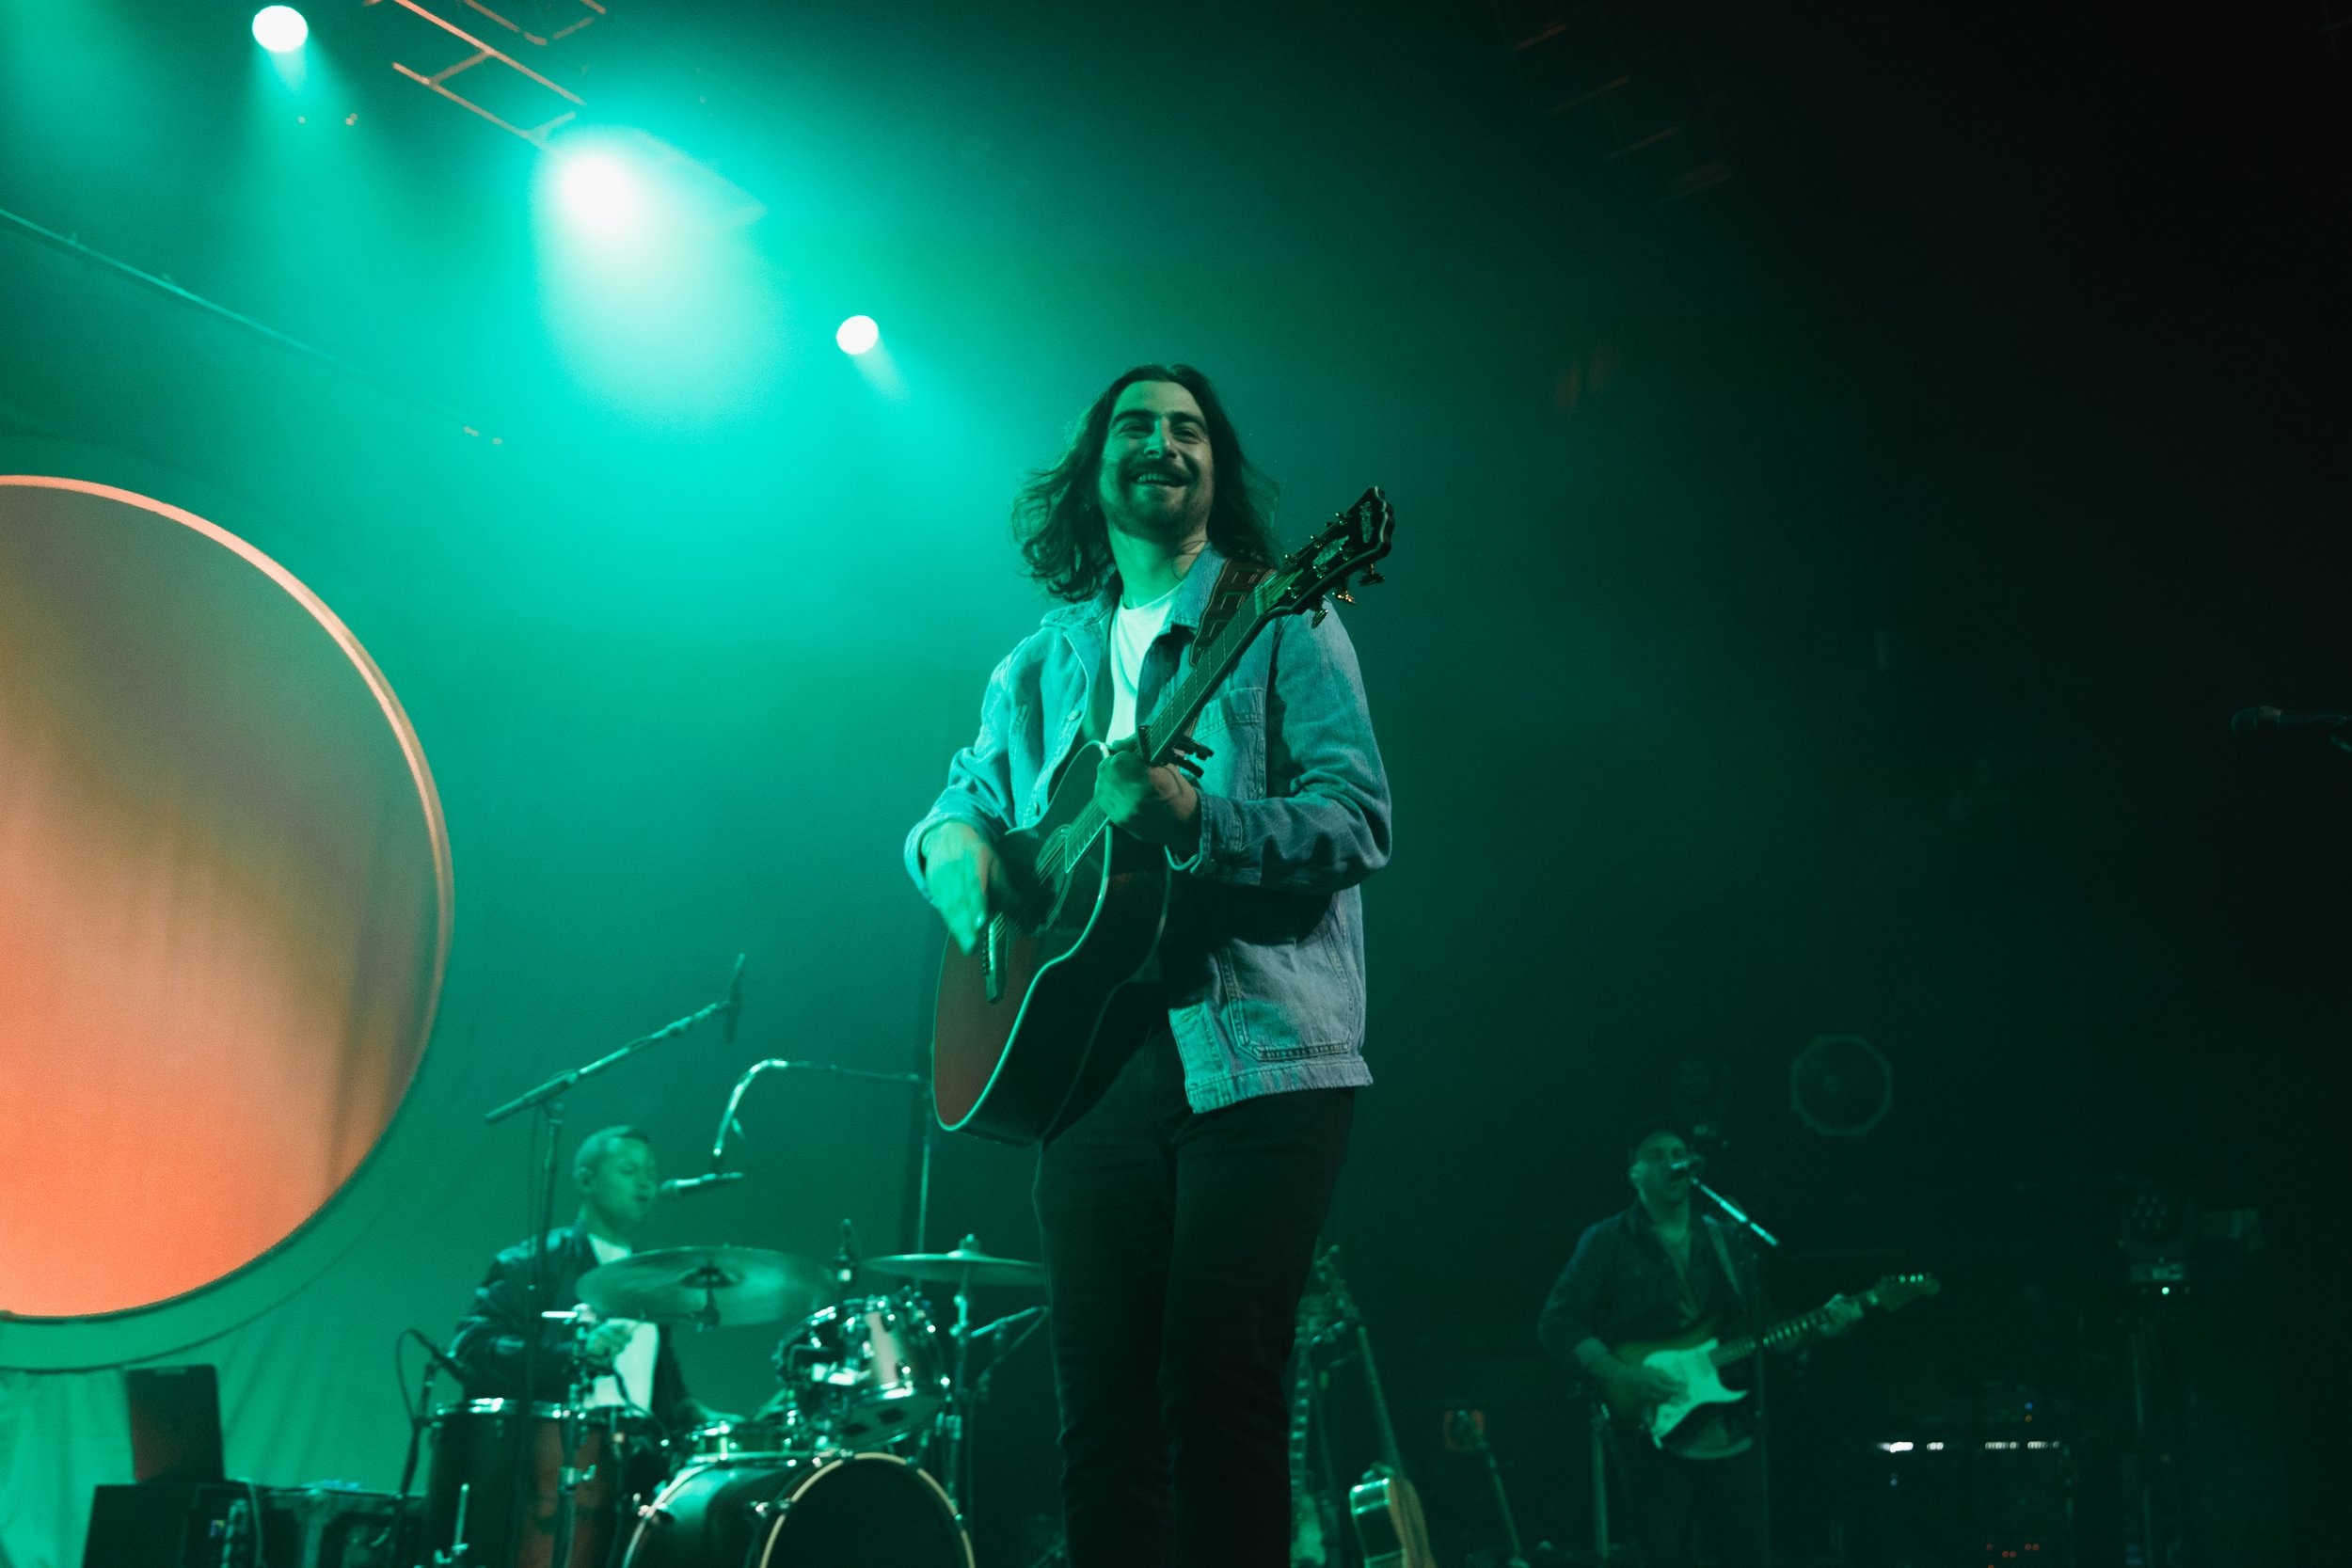 Photo Gallery: Blake Rose, Genevieve Stokes, and Noah Kahan at the House of Blues Five Cent Sound 2500x1670